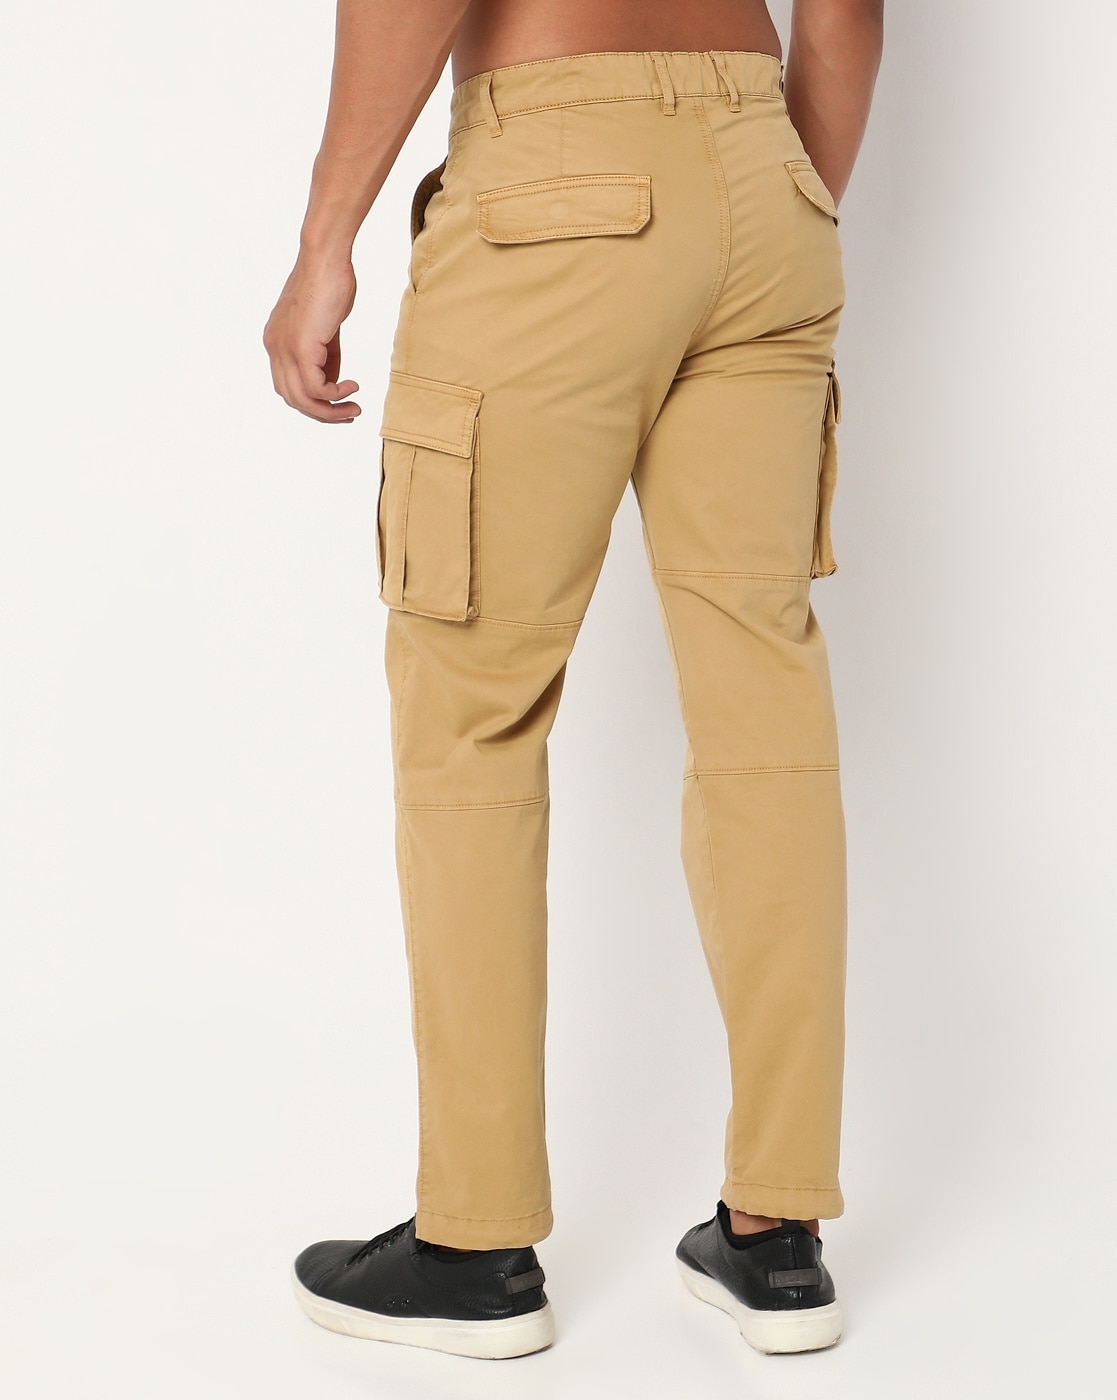 Buy GAS Mens Skinny Fit Rinse Wash Cargo Pants | Shoppers Stop